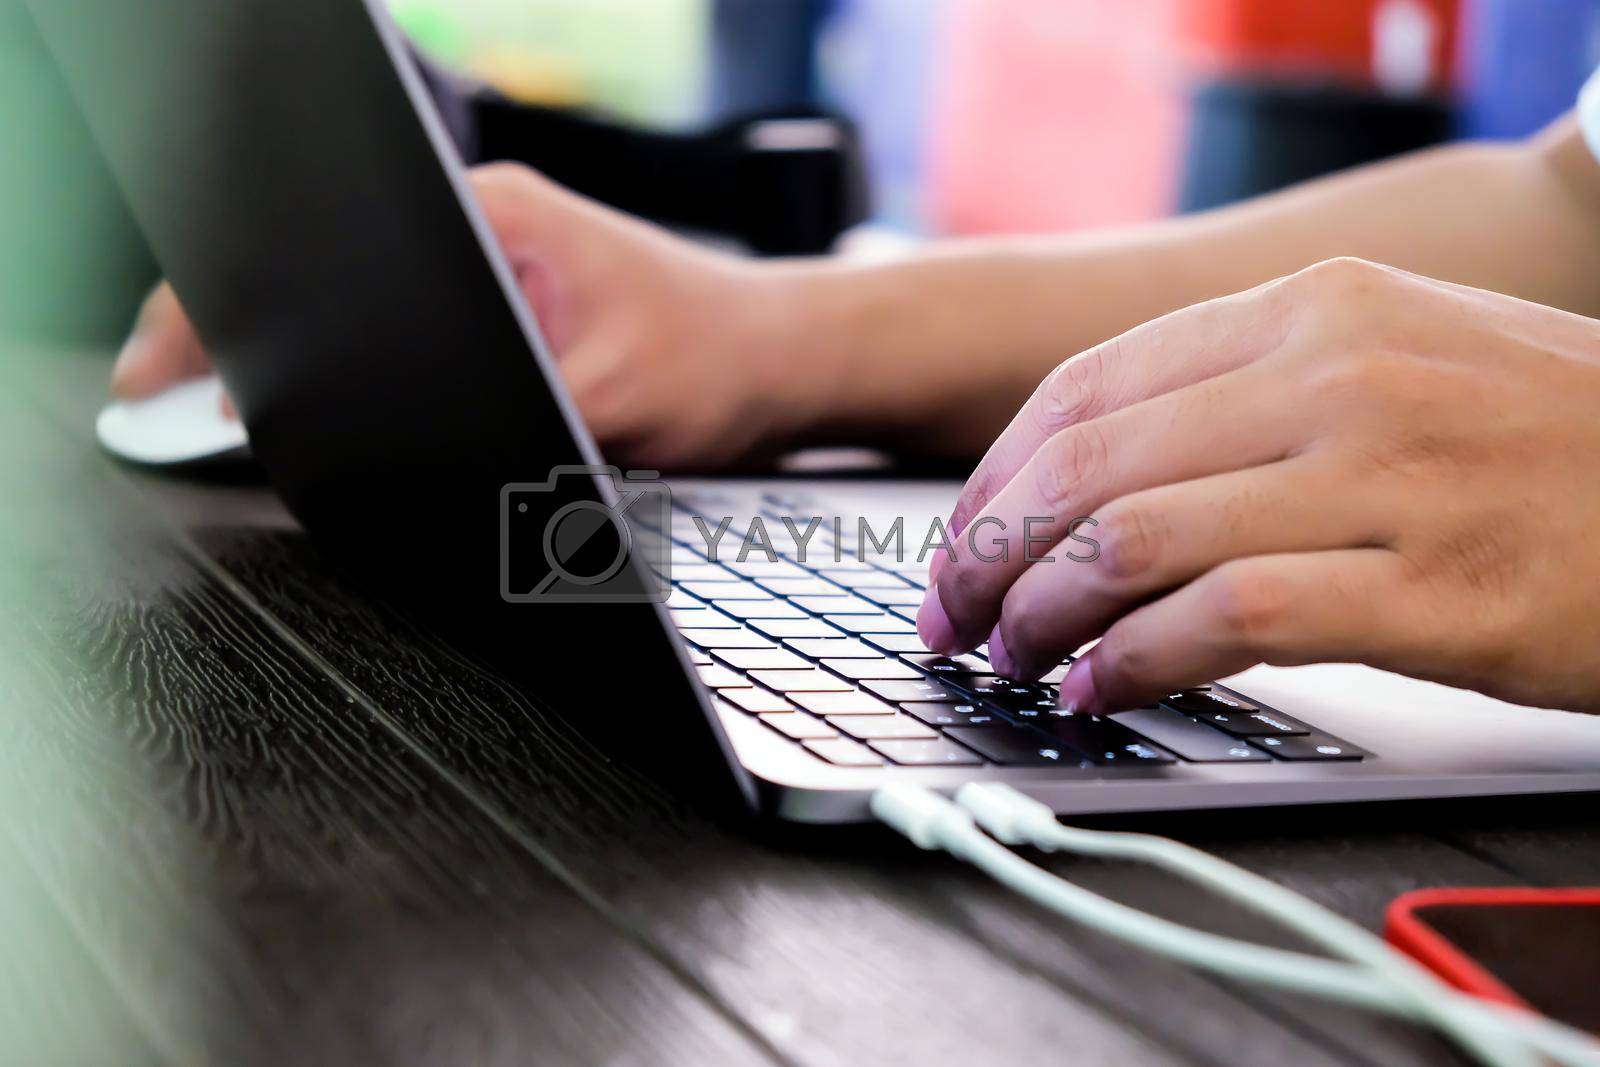 Royalty free image of hands of businessman typing on laptop keyboard by ponsulak